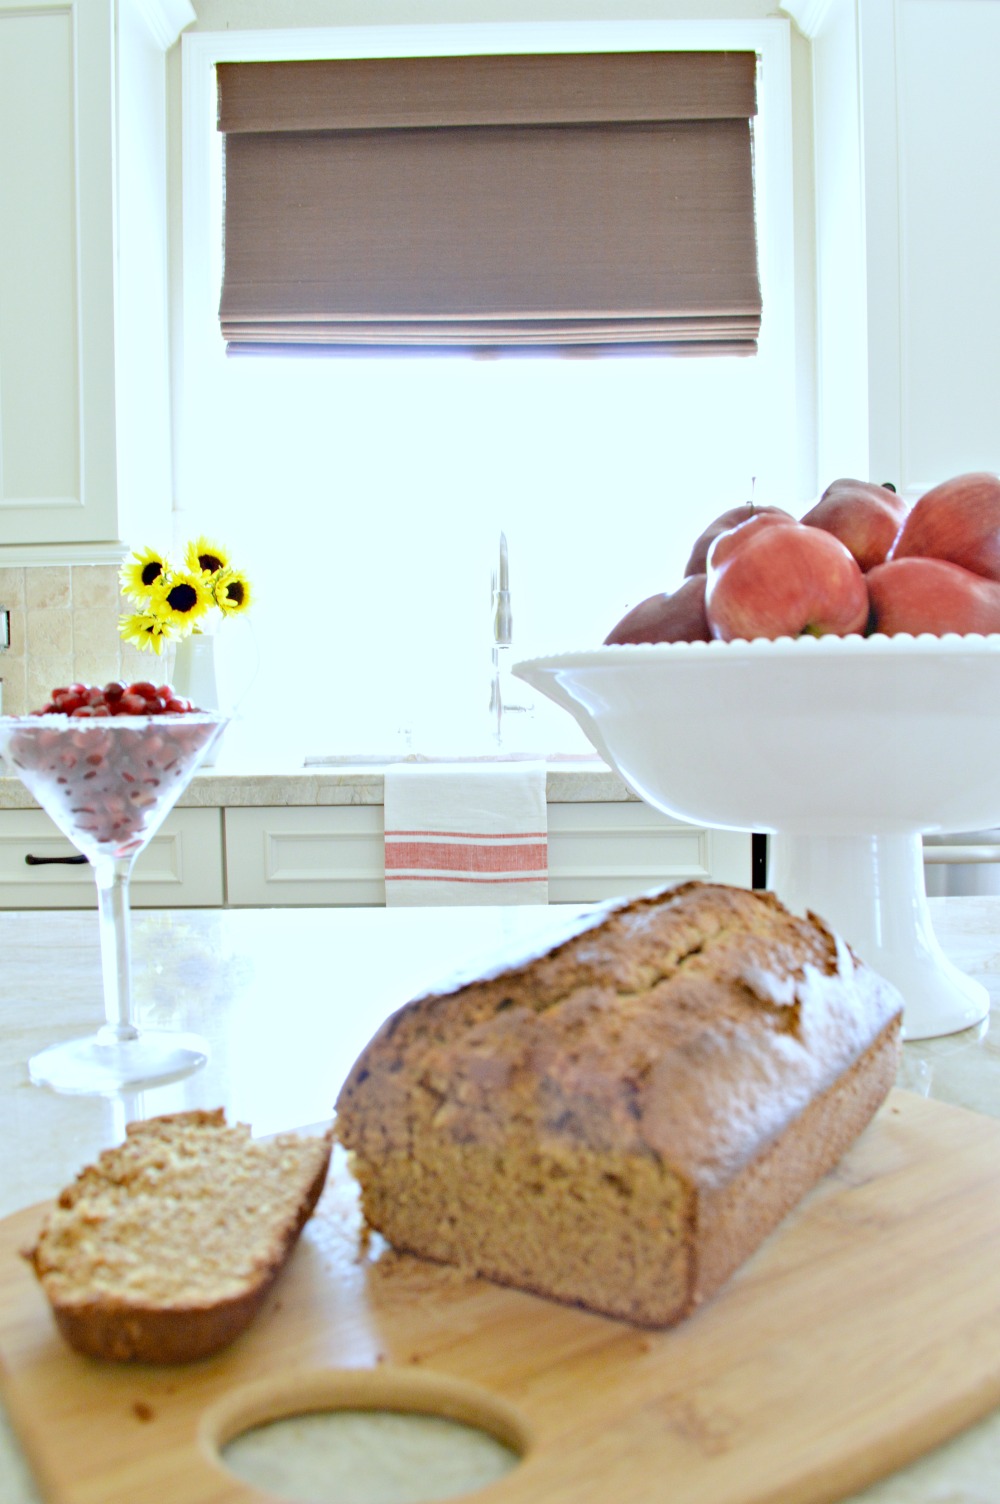 Pumkin bread with apples